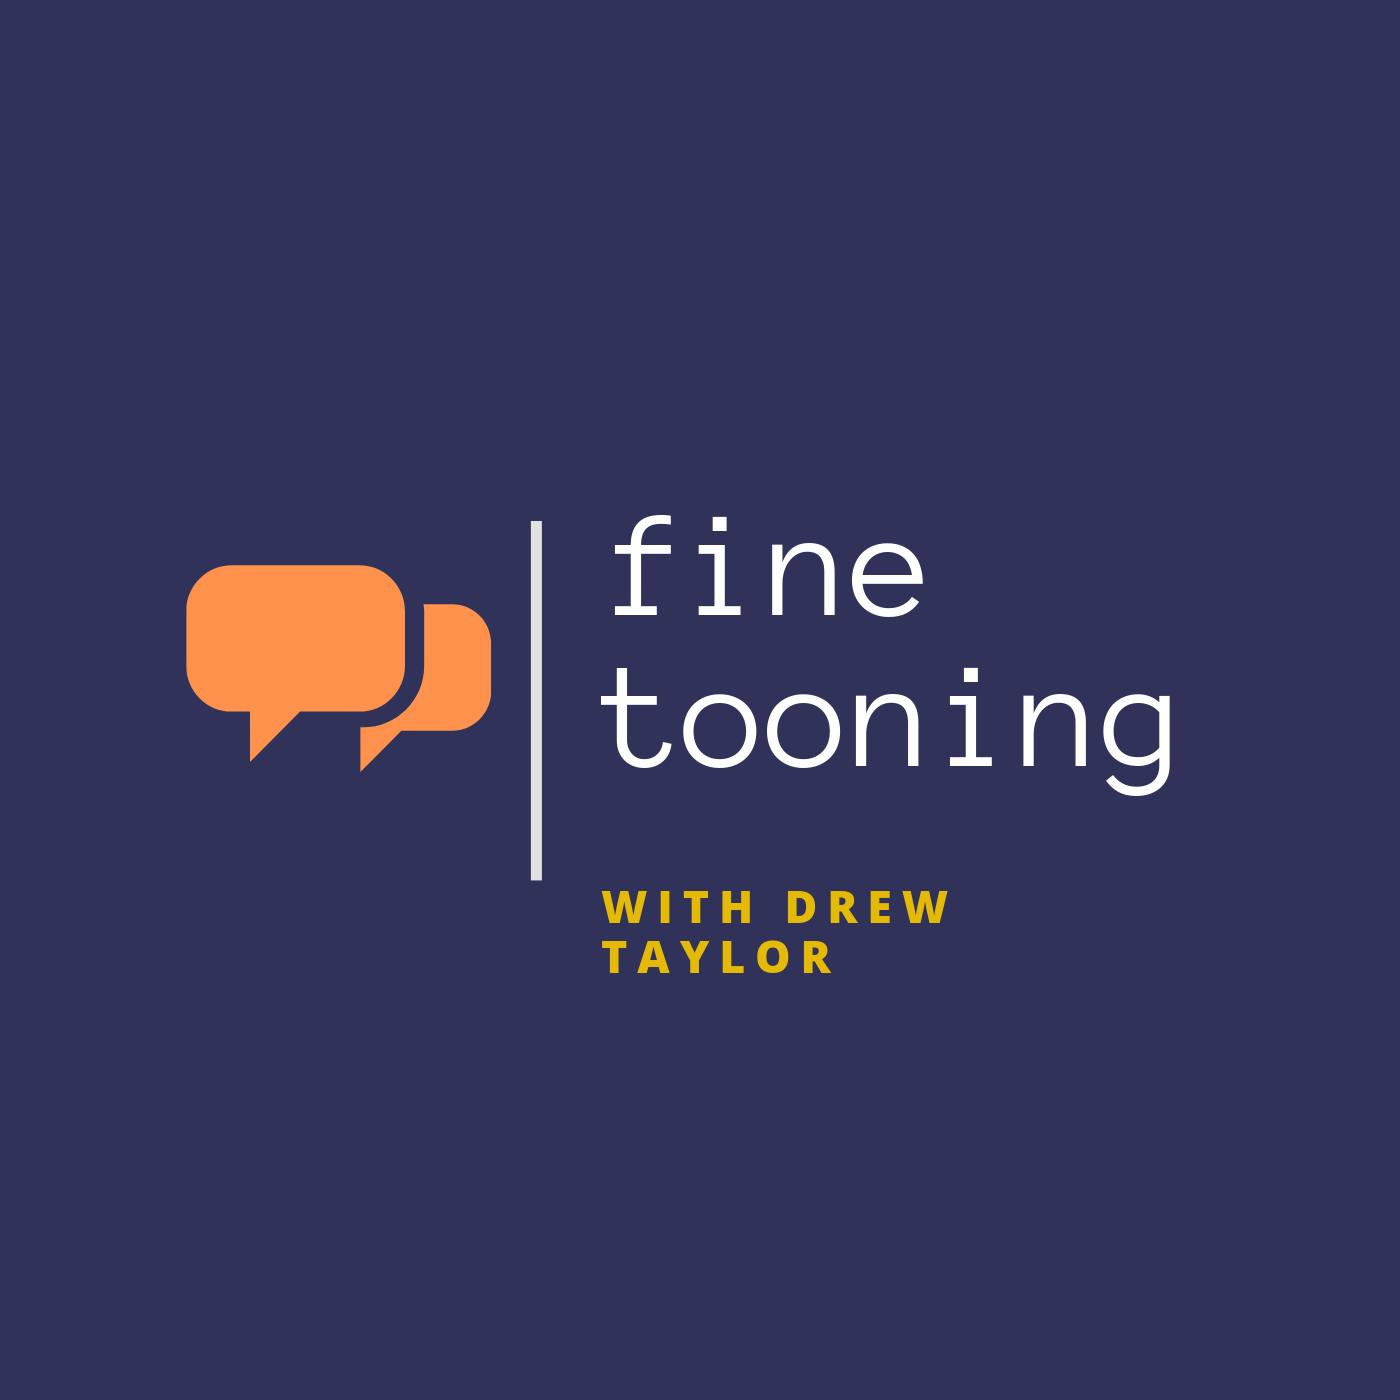 Fine Tooning with Drew Taylor - Episode 178: How Major Matt Mason inspired the creation of Buzz Lightyear